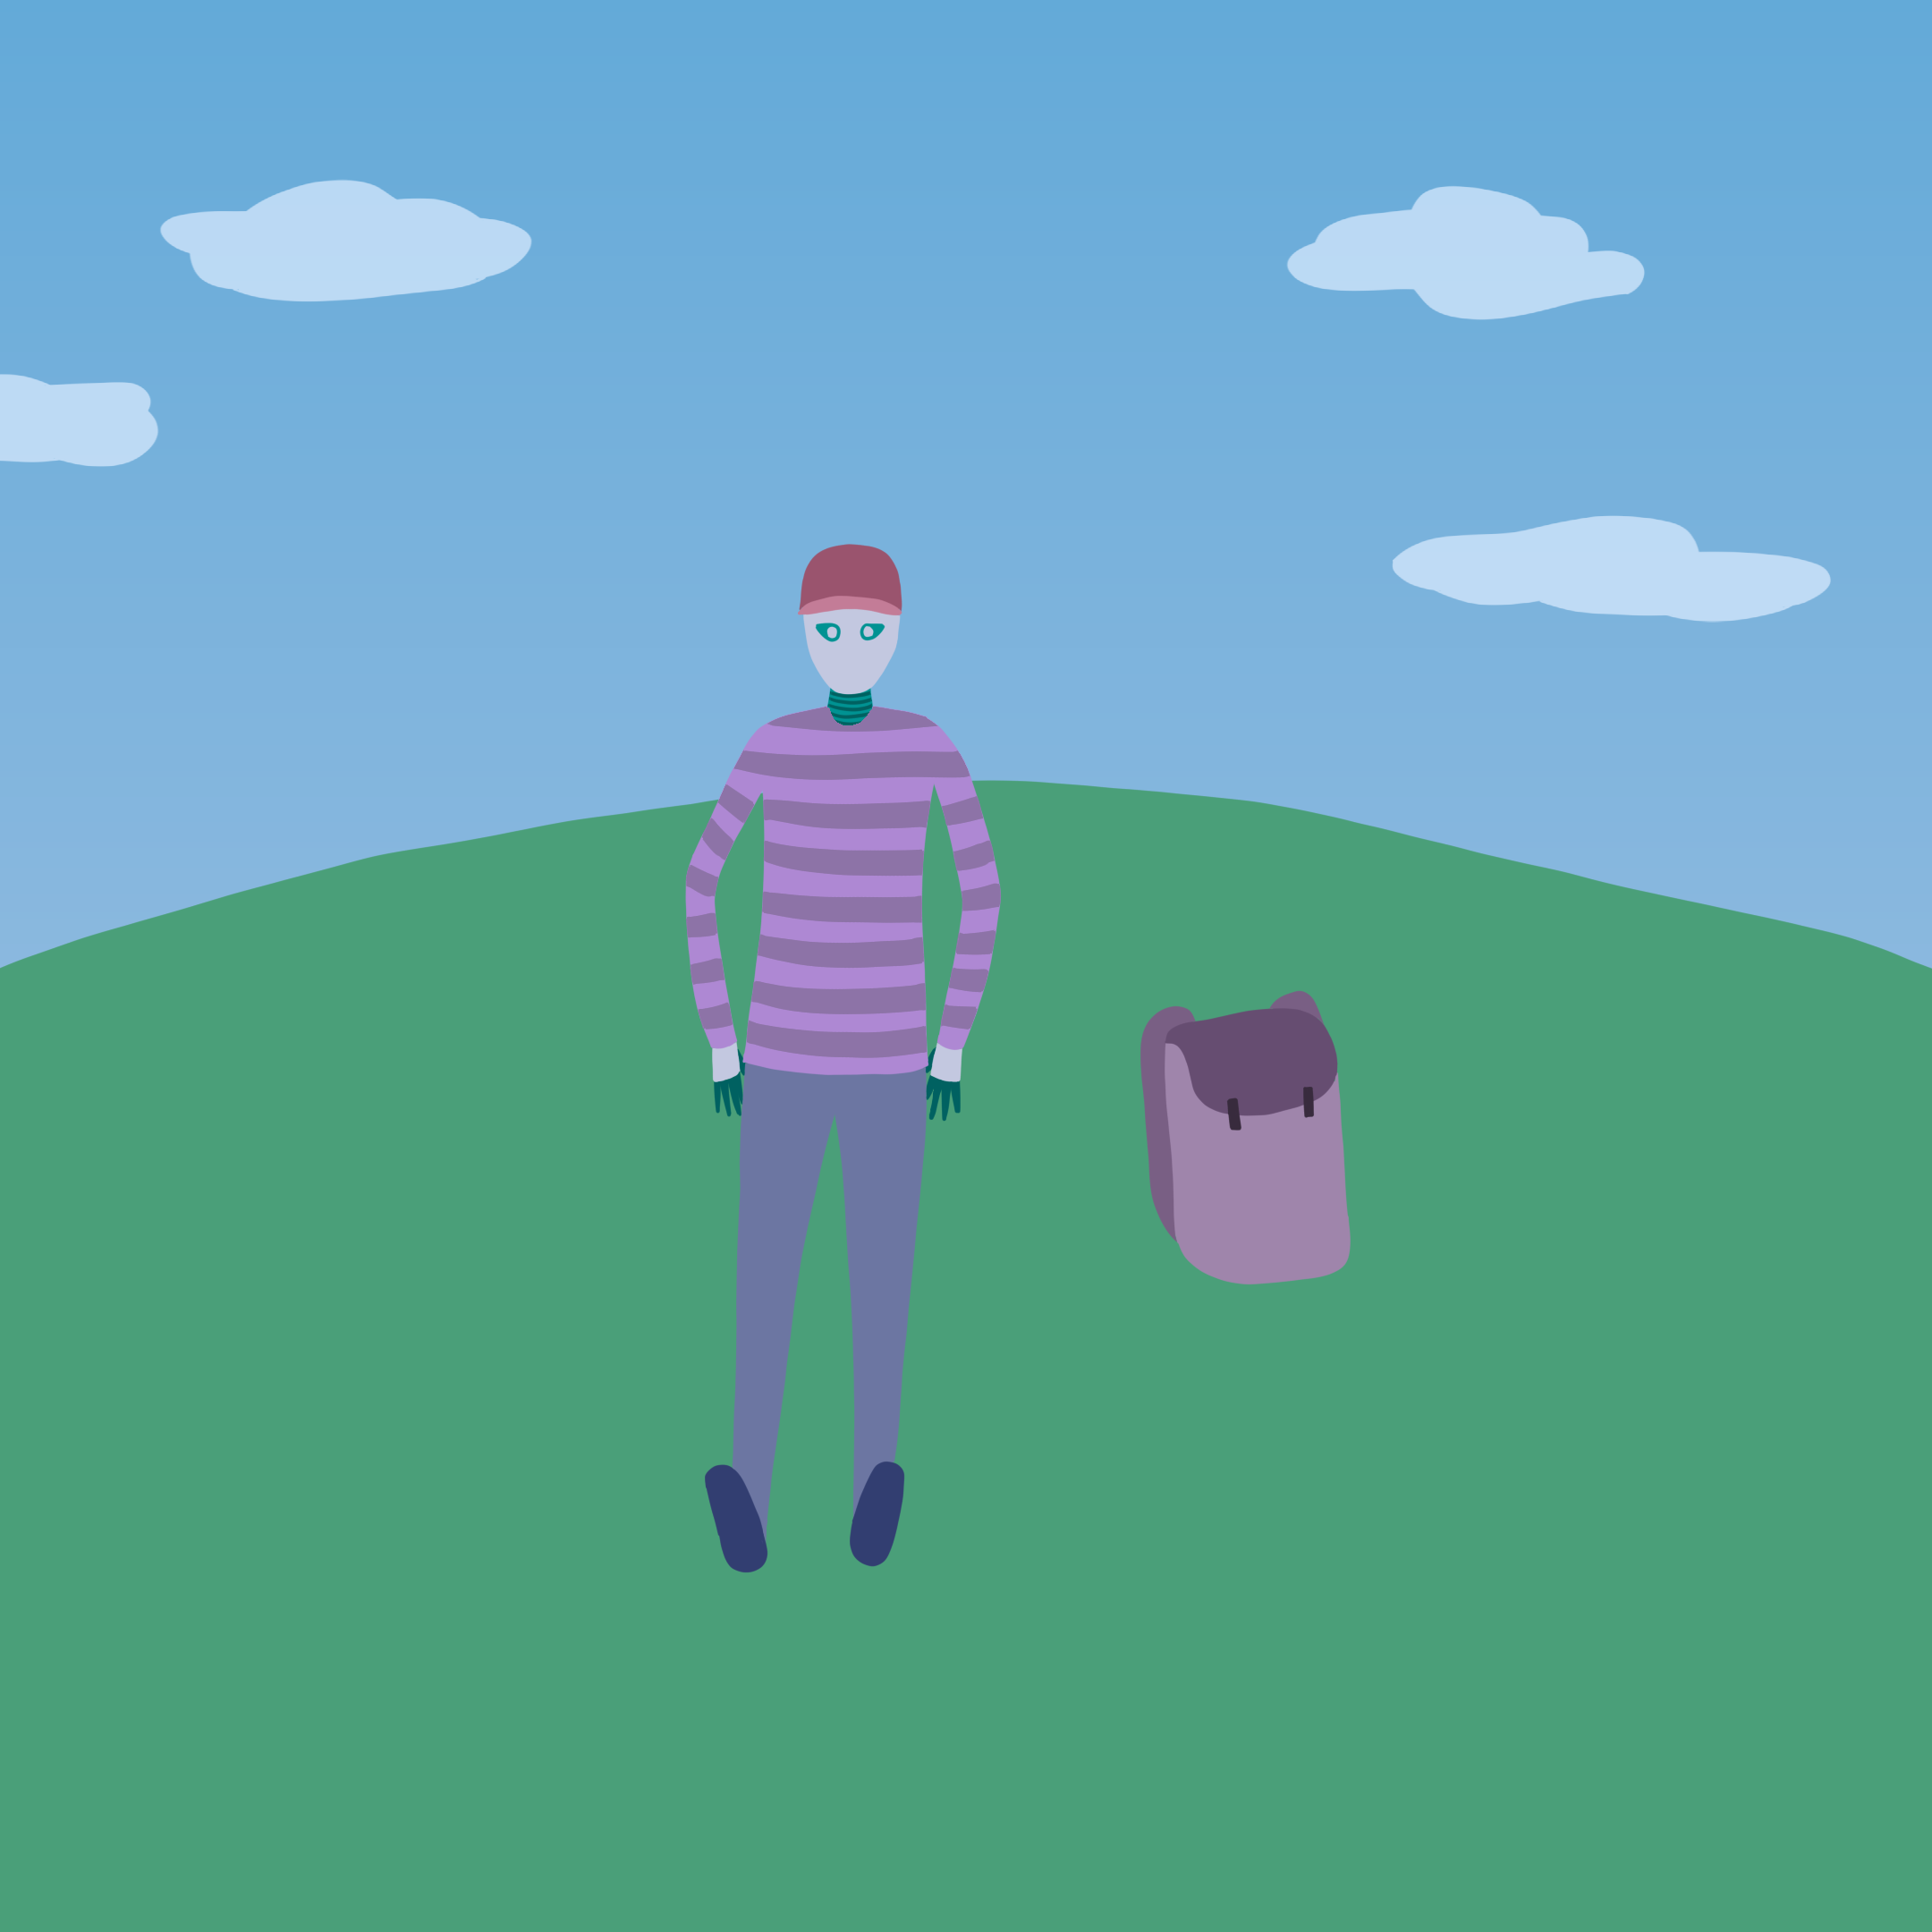 A robot named Rova sitting on a hill with their backpack nearby.